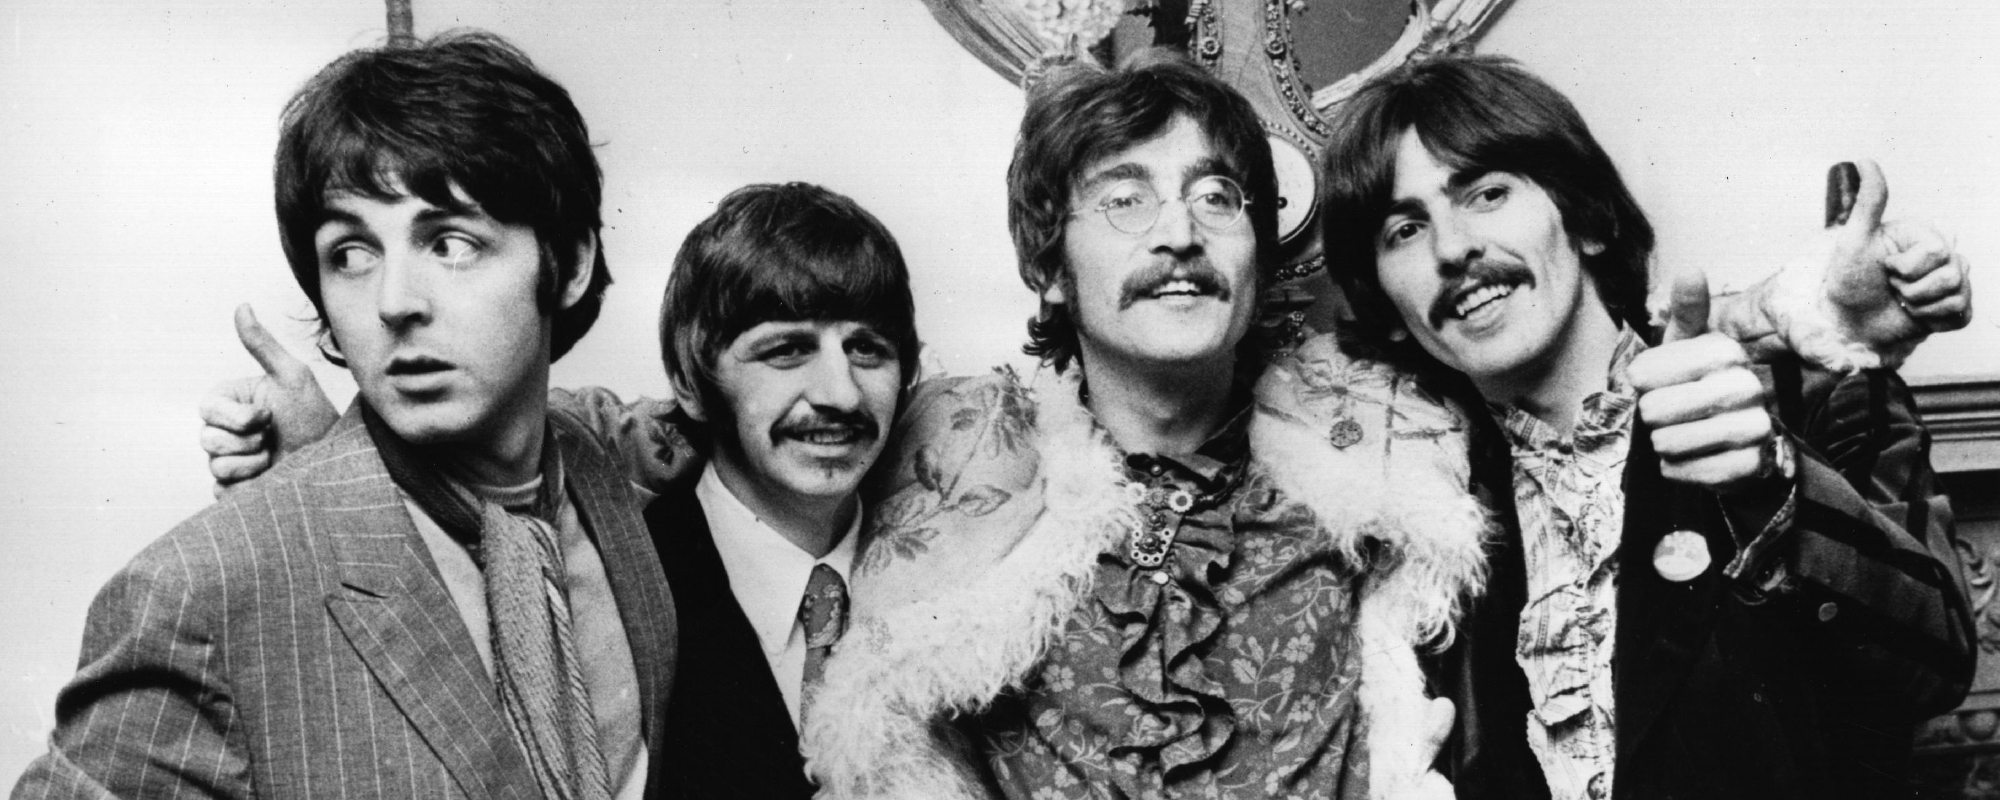 Reflections on Day 2 of ‘The Beatles: Get Back’ Documentary